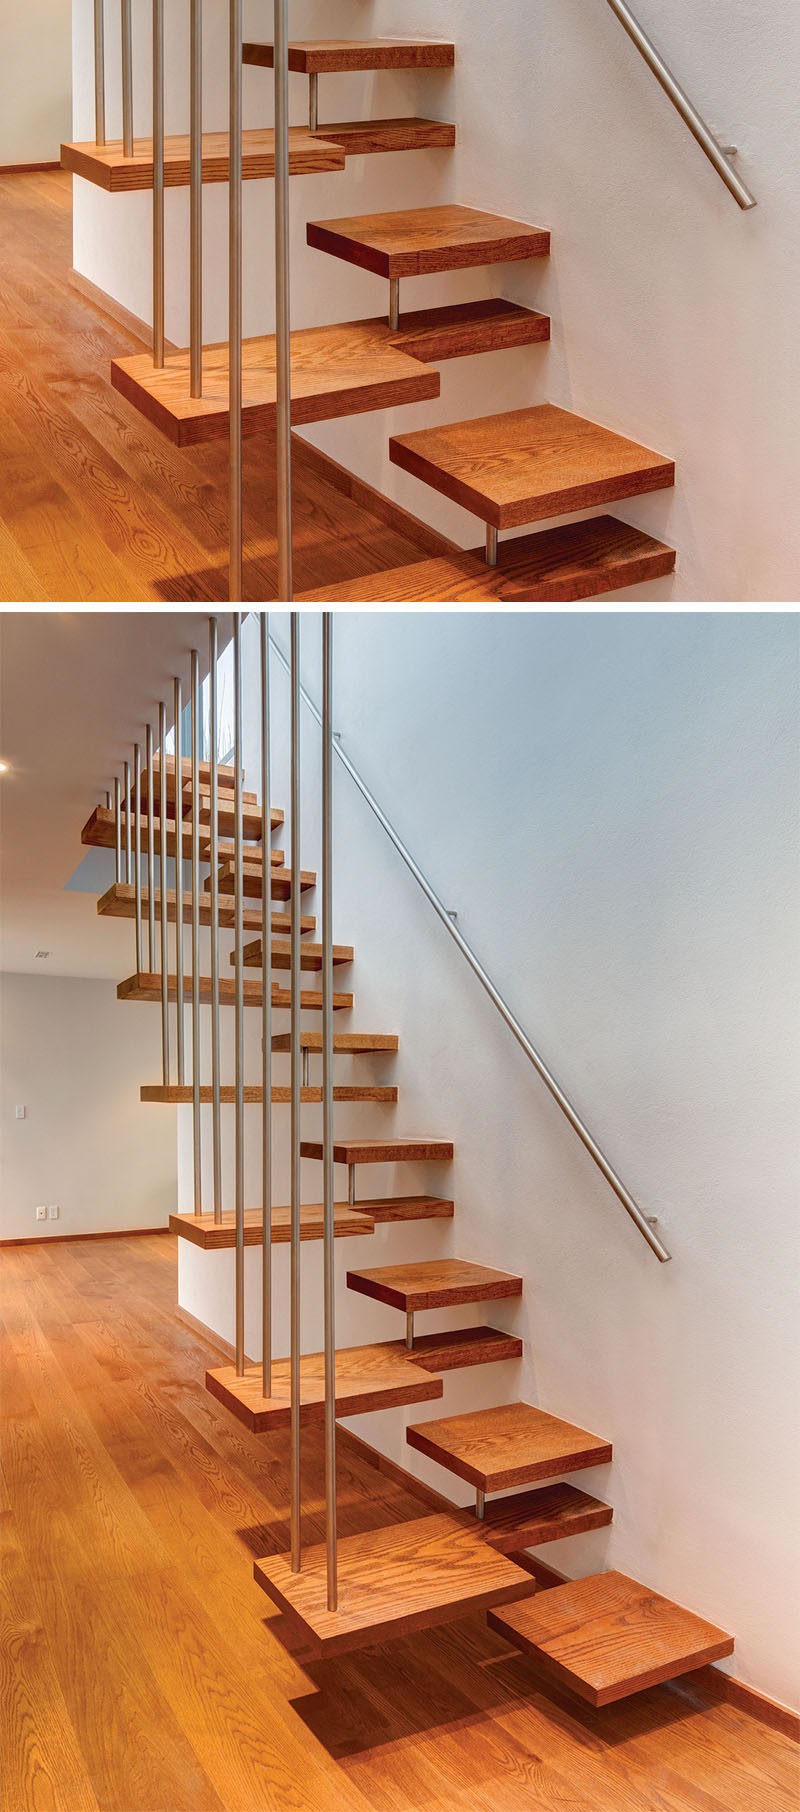 18 Examples Of Stair Details To Inspire You // If youre not careful, these wooden stairs could be a bit confusing.